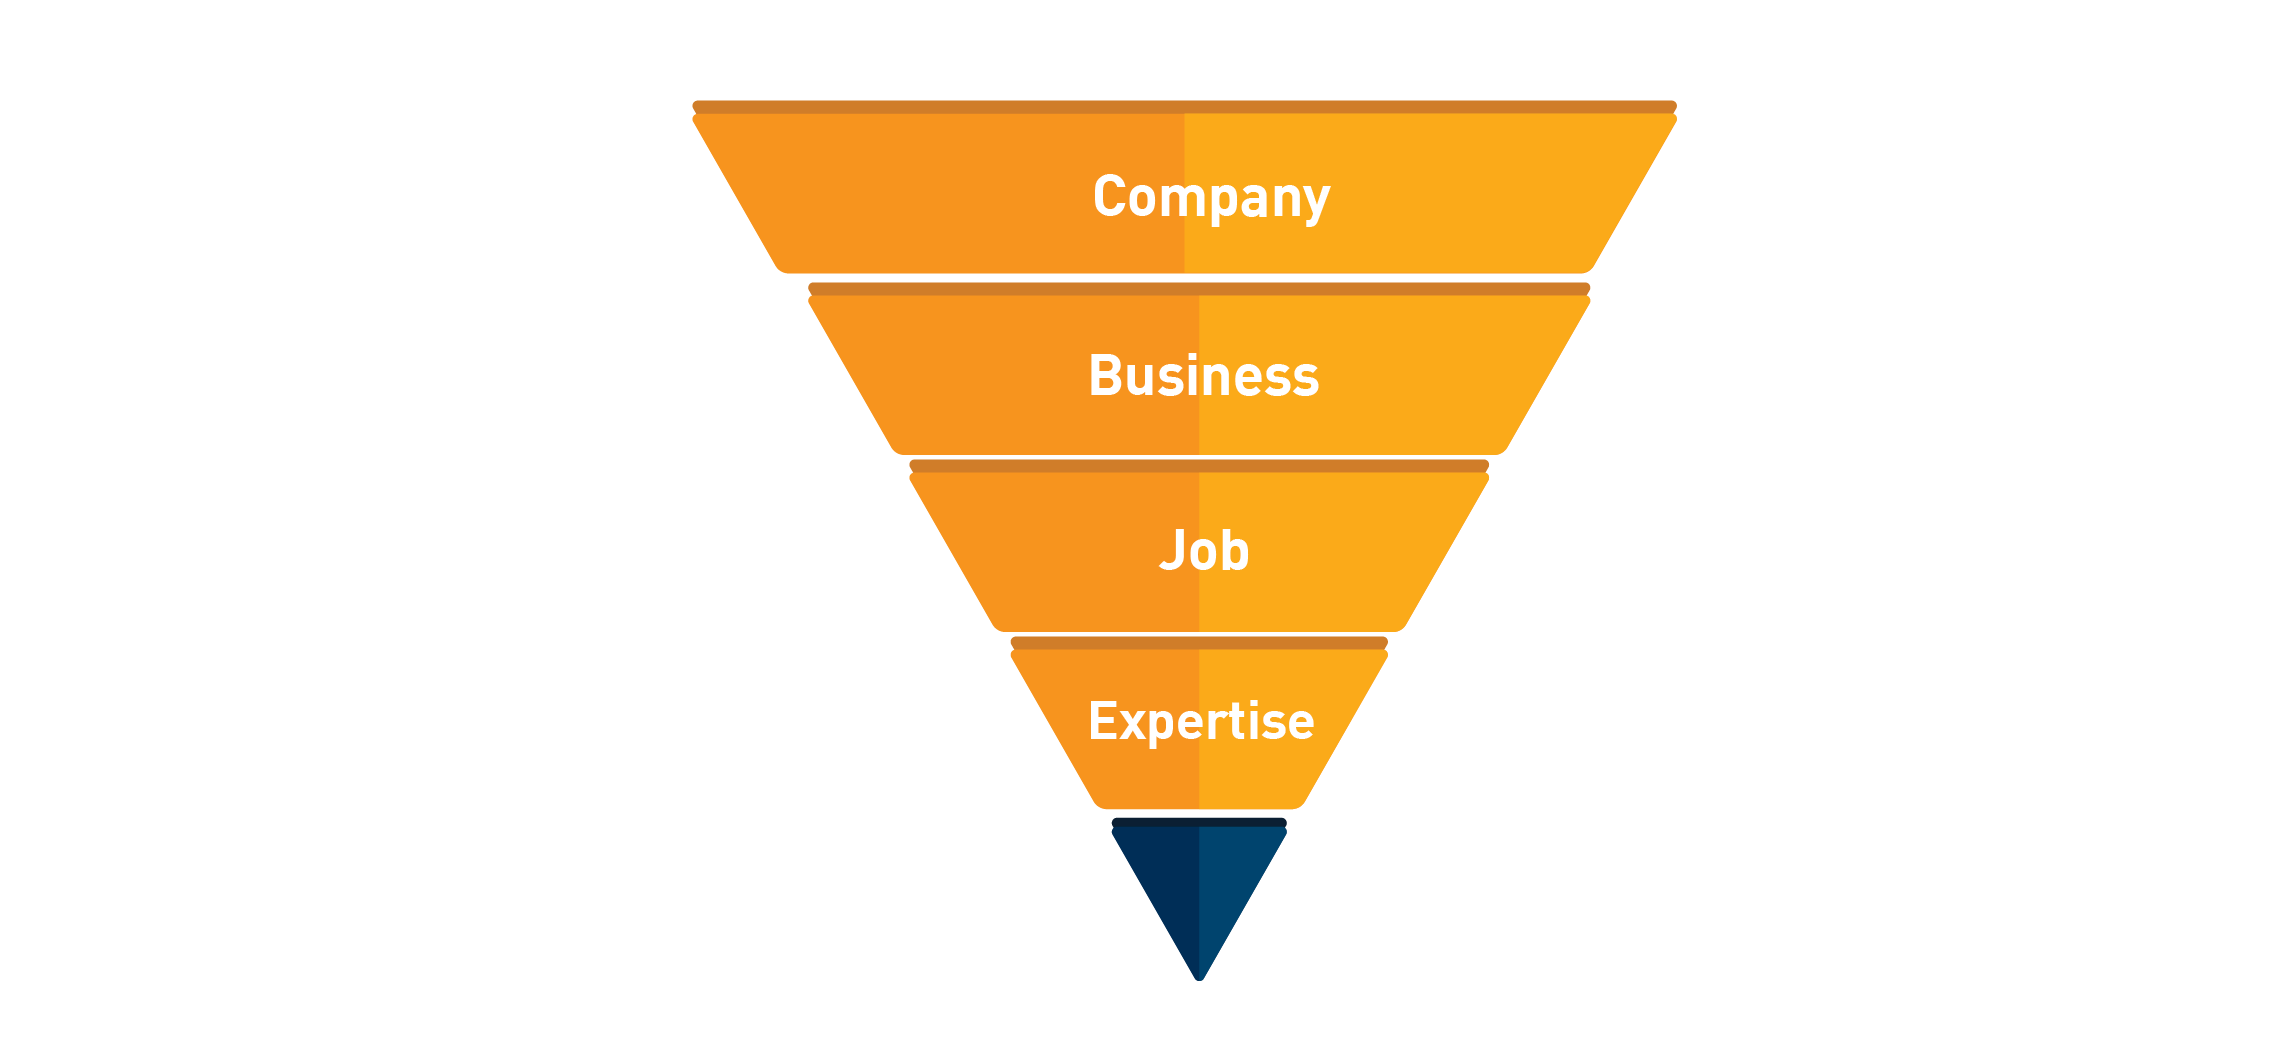 onboarding hierarchy goes from broad to narrow